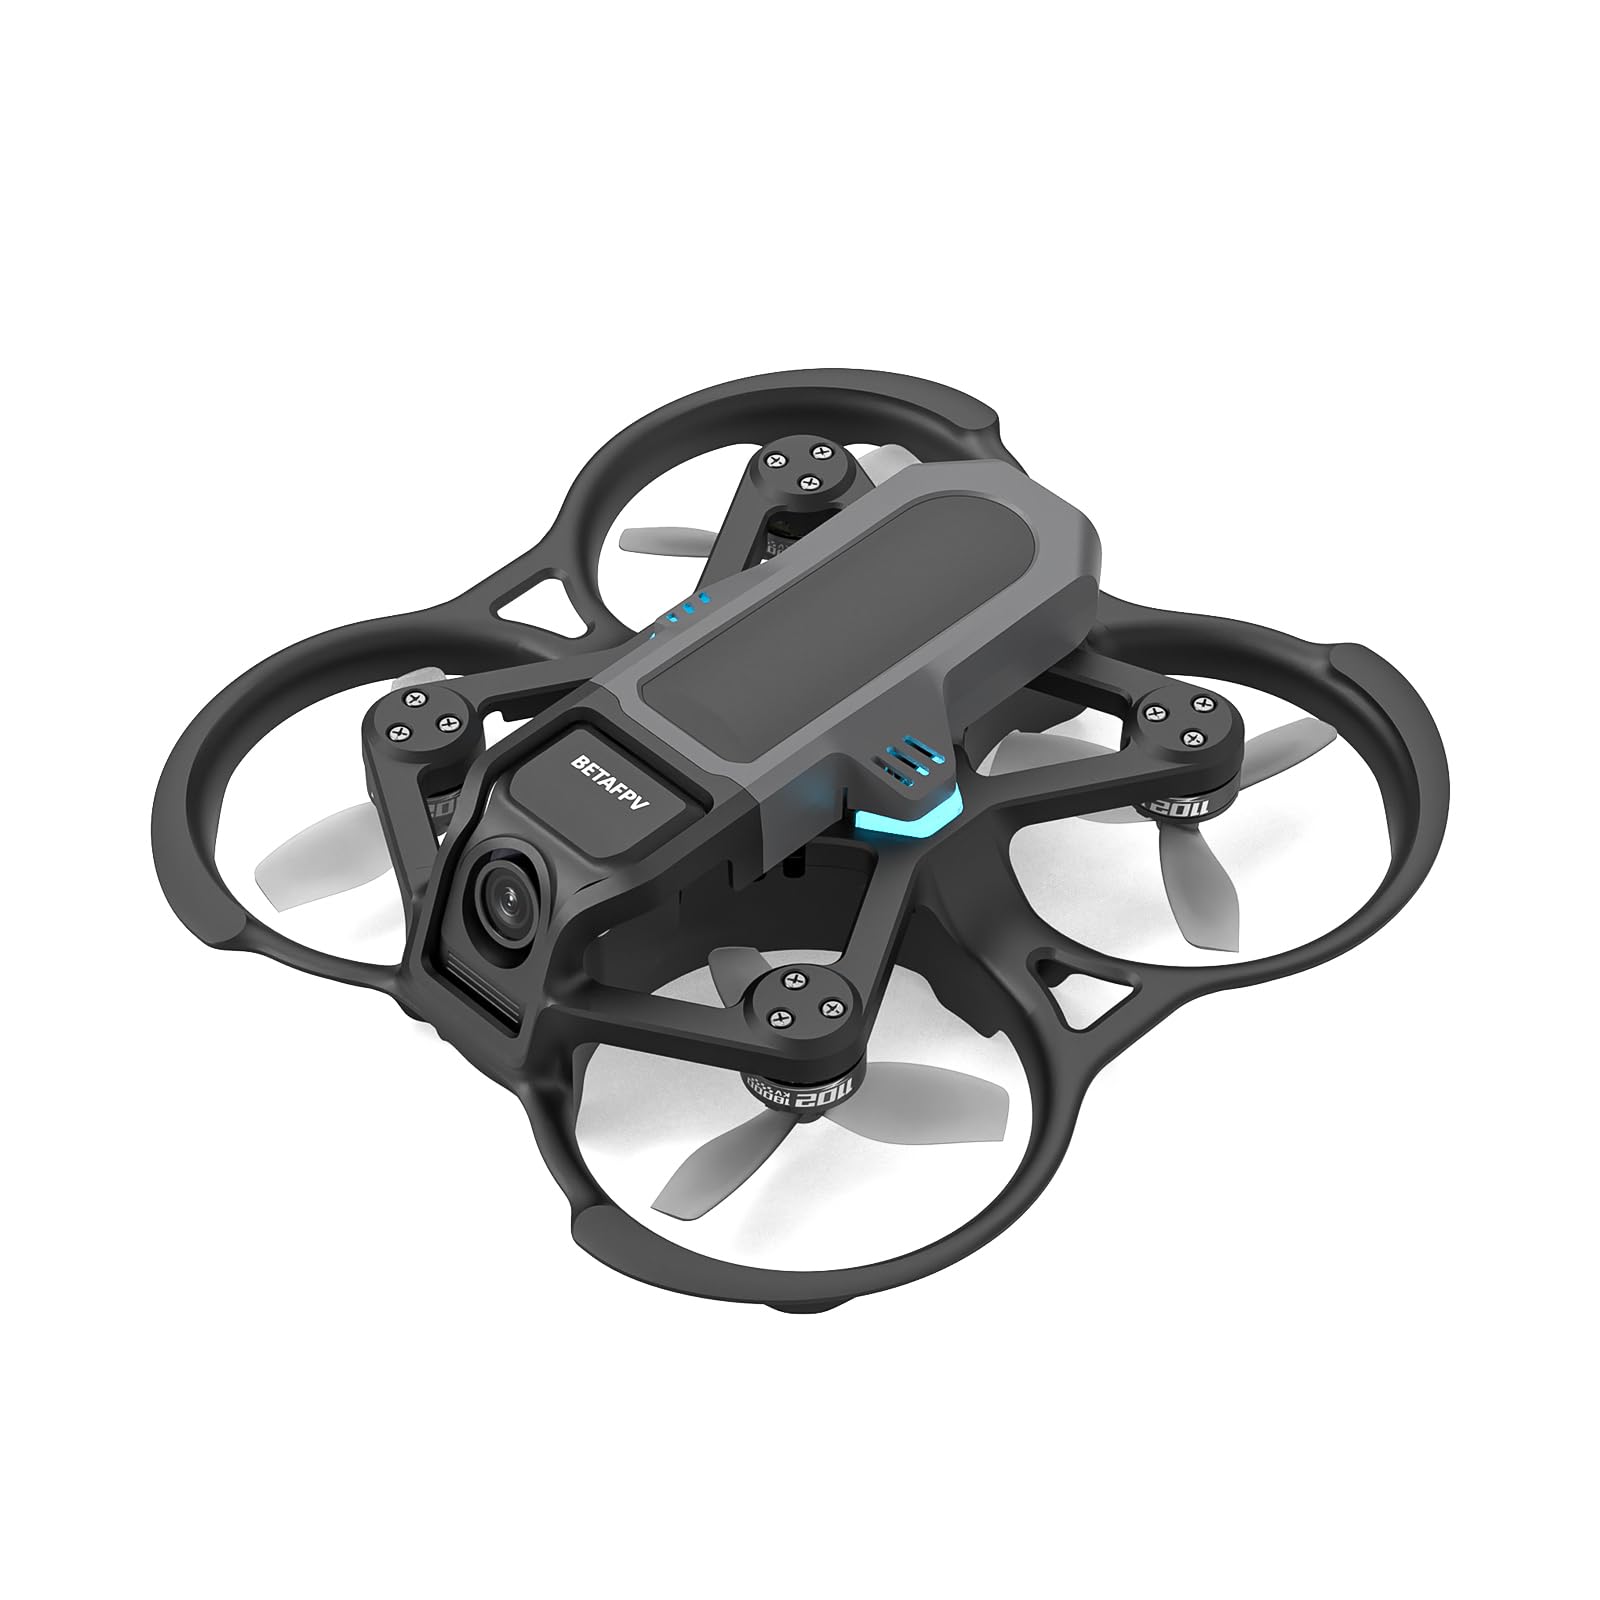 BETAFPV Aquila16 1S Brushless Quadcopter with Altitude Hold Function, 8 Mins Flight, 200m Distance, 3 Flight Speed Modes, Built-in Propeller Guard, for Teens Adults FPV Beginner to Fly Indoor Outdoor von BETAFPV